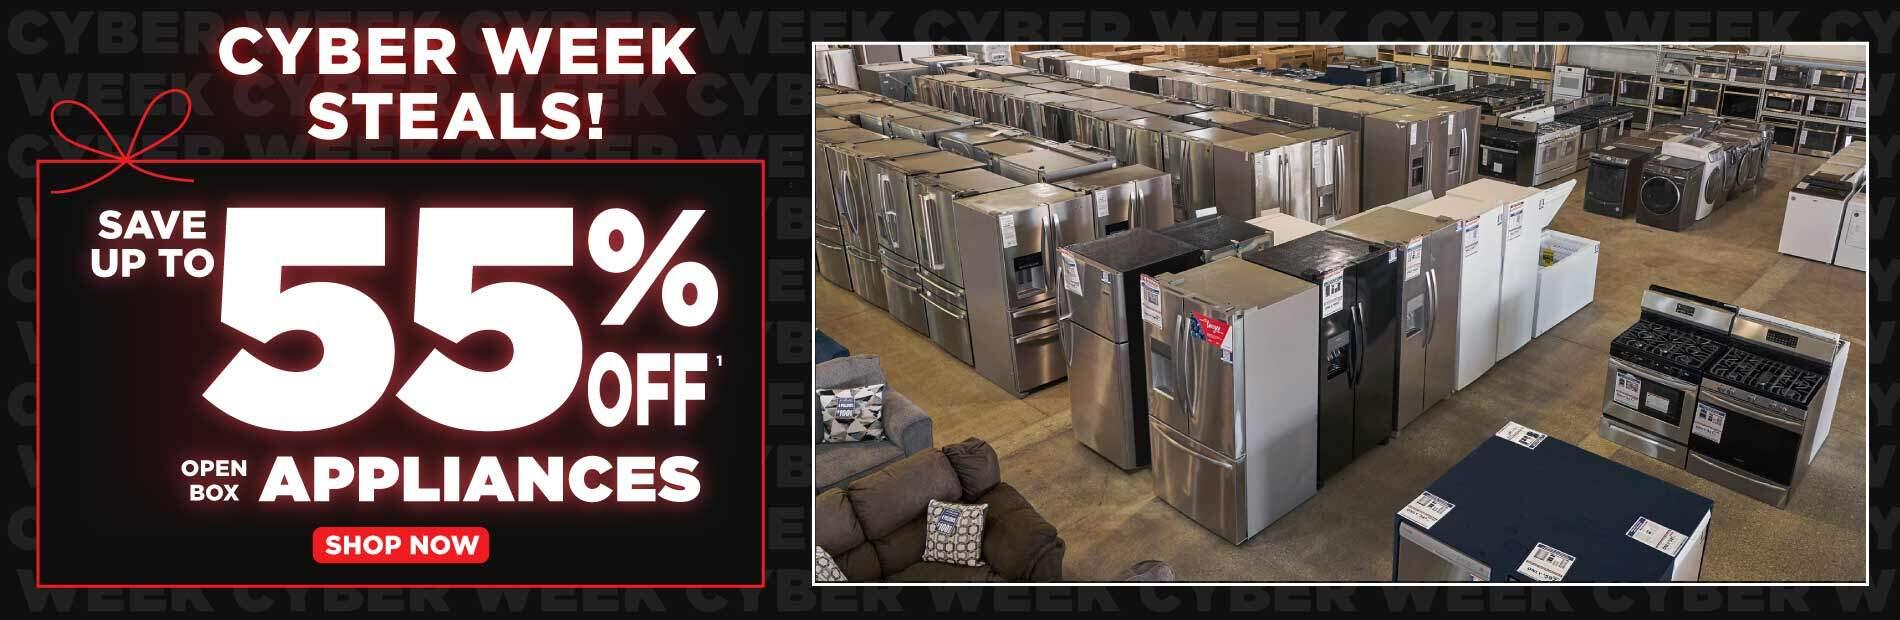 Cyber Week Steals! Save up to 55% off 1 open box Appliances. Shop Now